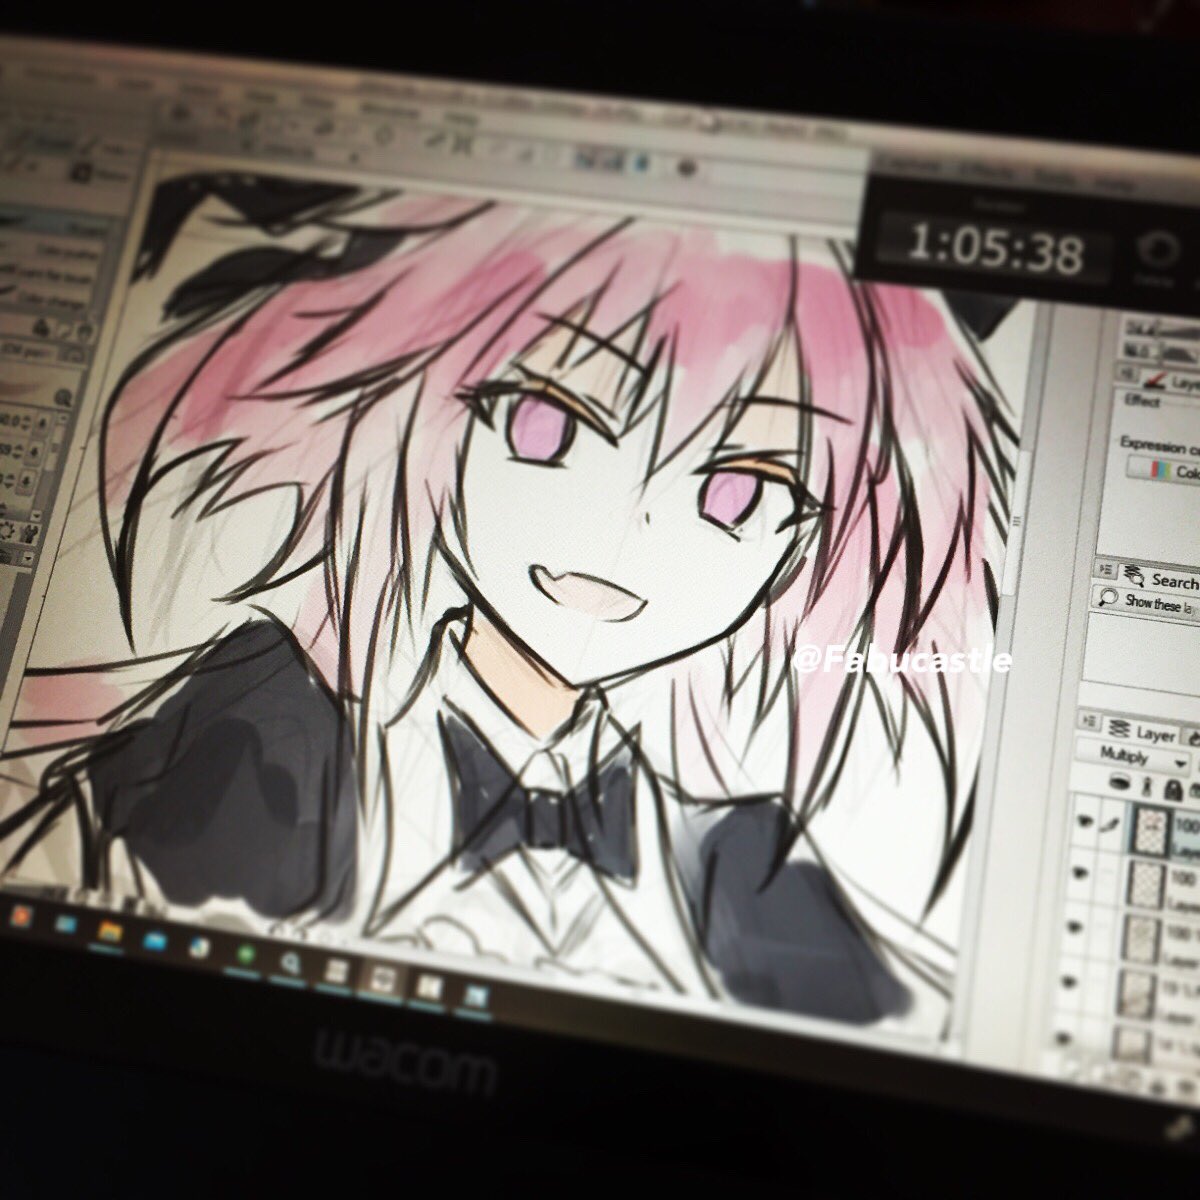 WIP of a piece for my April patrons. I'll post the finished one here eventually if I still like it by then

Astolfo's design is one of my faves and I really like Konoe Ototsugu's style! Always love it when Konoe Ototsugu and Wadarco draw FGO characters outside Apo and Ex 